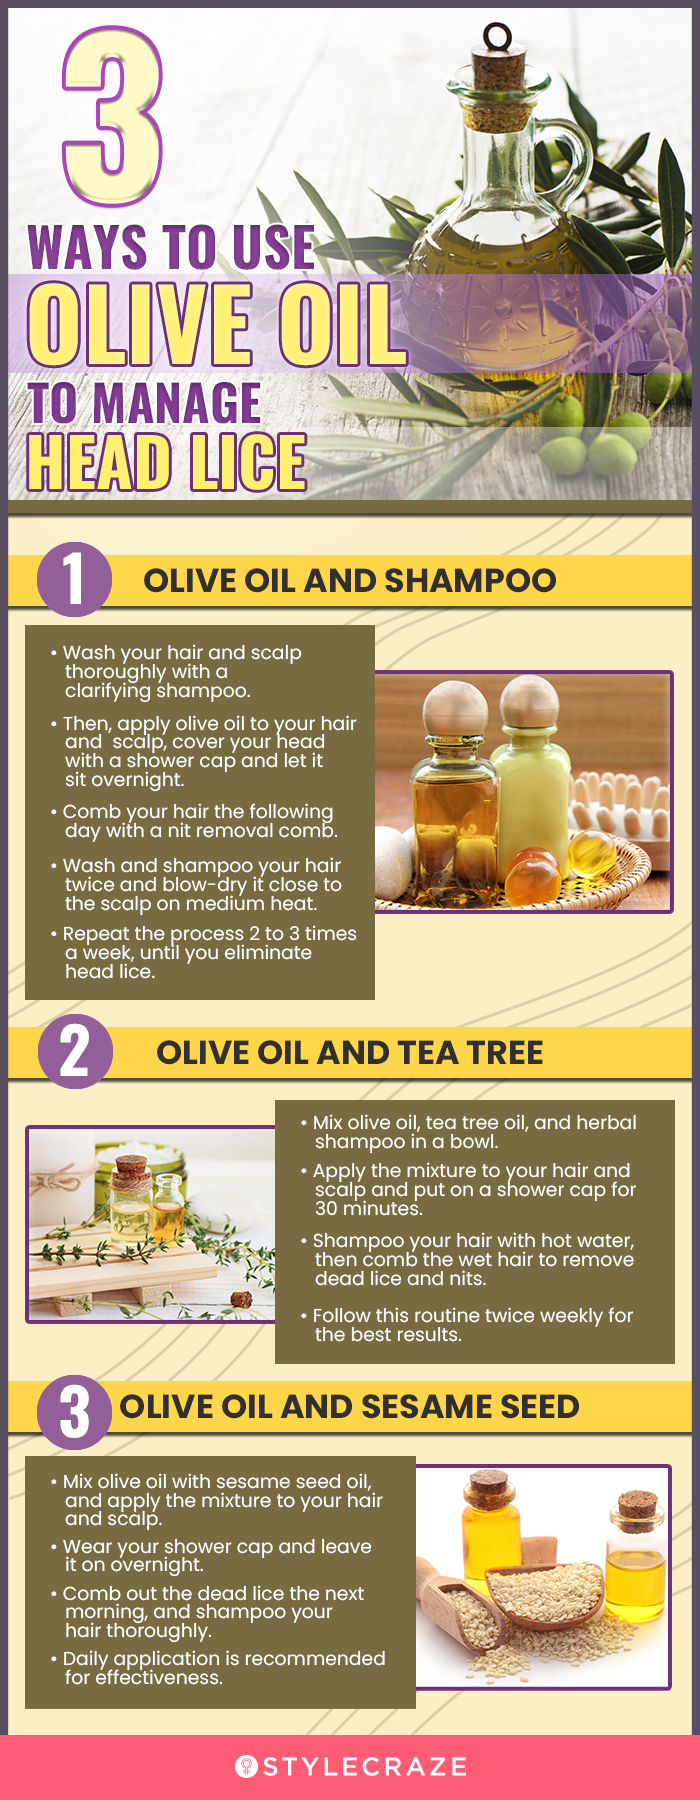 3 ways to use olive oil to manage head lice (infographic)